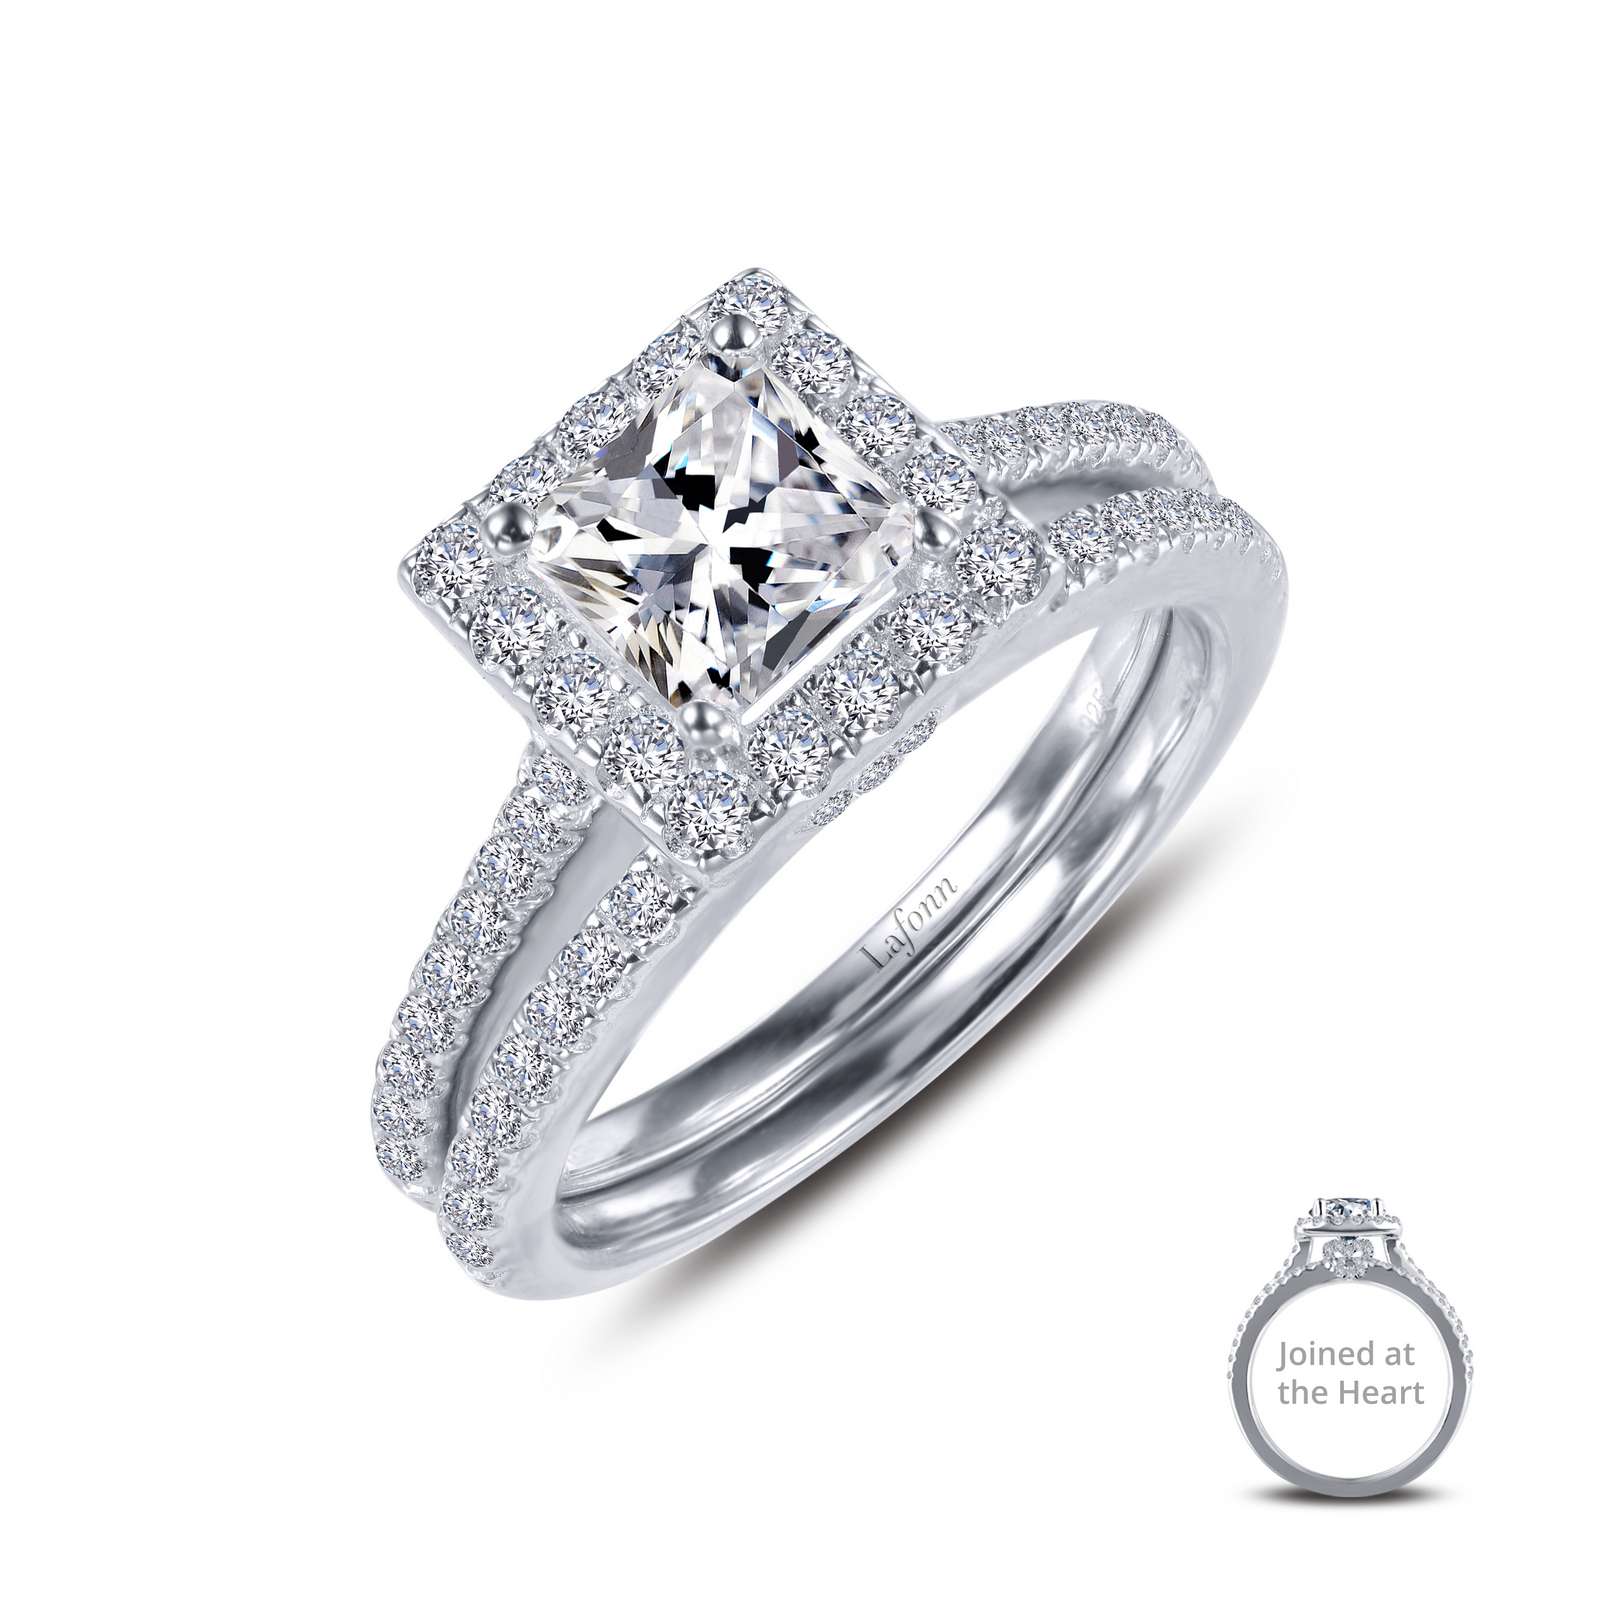 Joined-At-The-Heart Wedding Set Wood's Jewelers Mt. Pleasant, PA